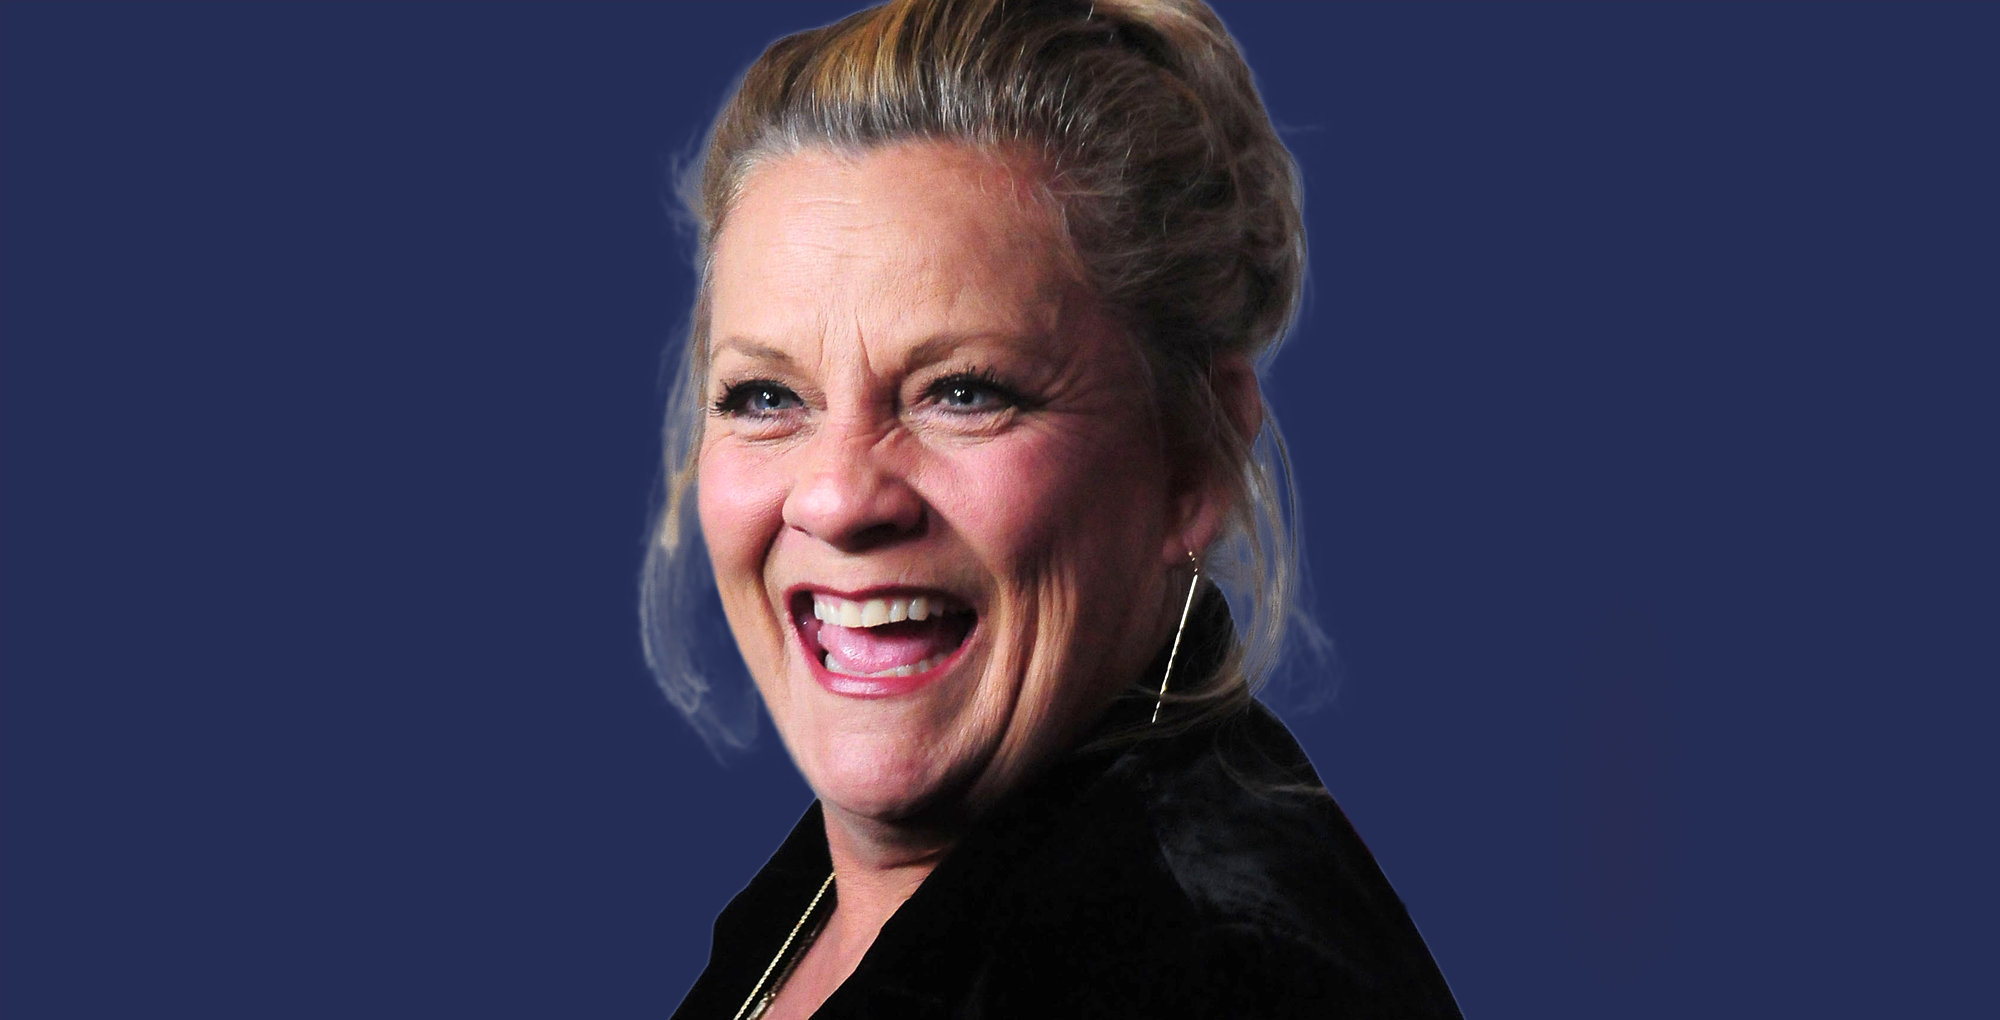 veteran soap star kim zimmer smiling for her birthday with a blue background